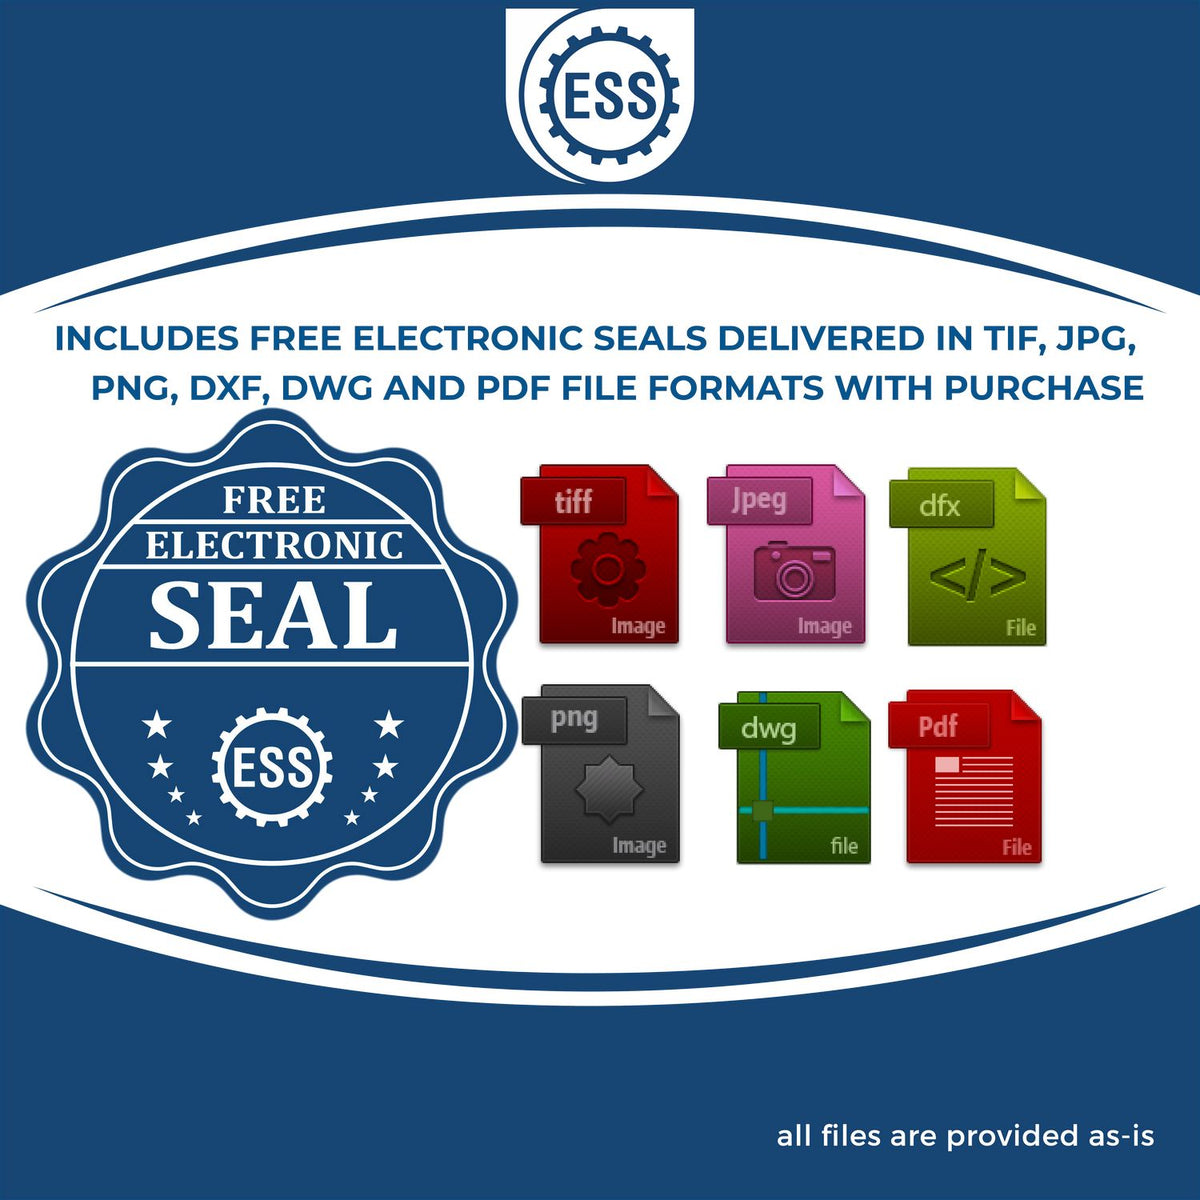 An infographic for the free electronic seal for the Gift Arizona Geologist Seal illustrating the different file type icons such as DXF, DWG, TIF, JPG and PNG.